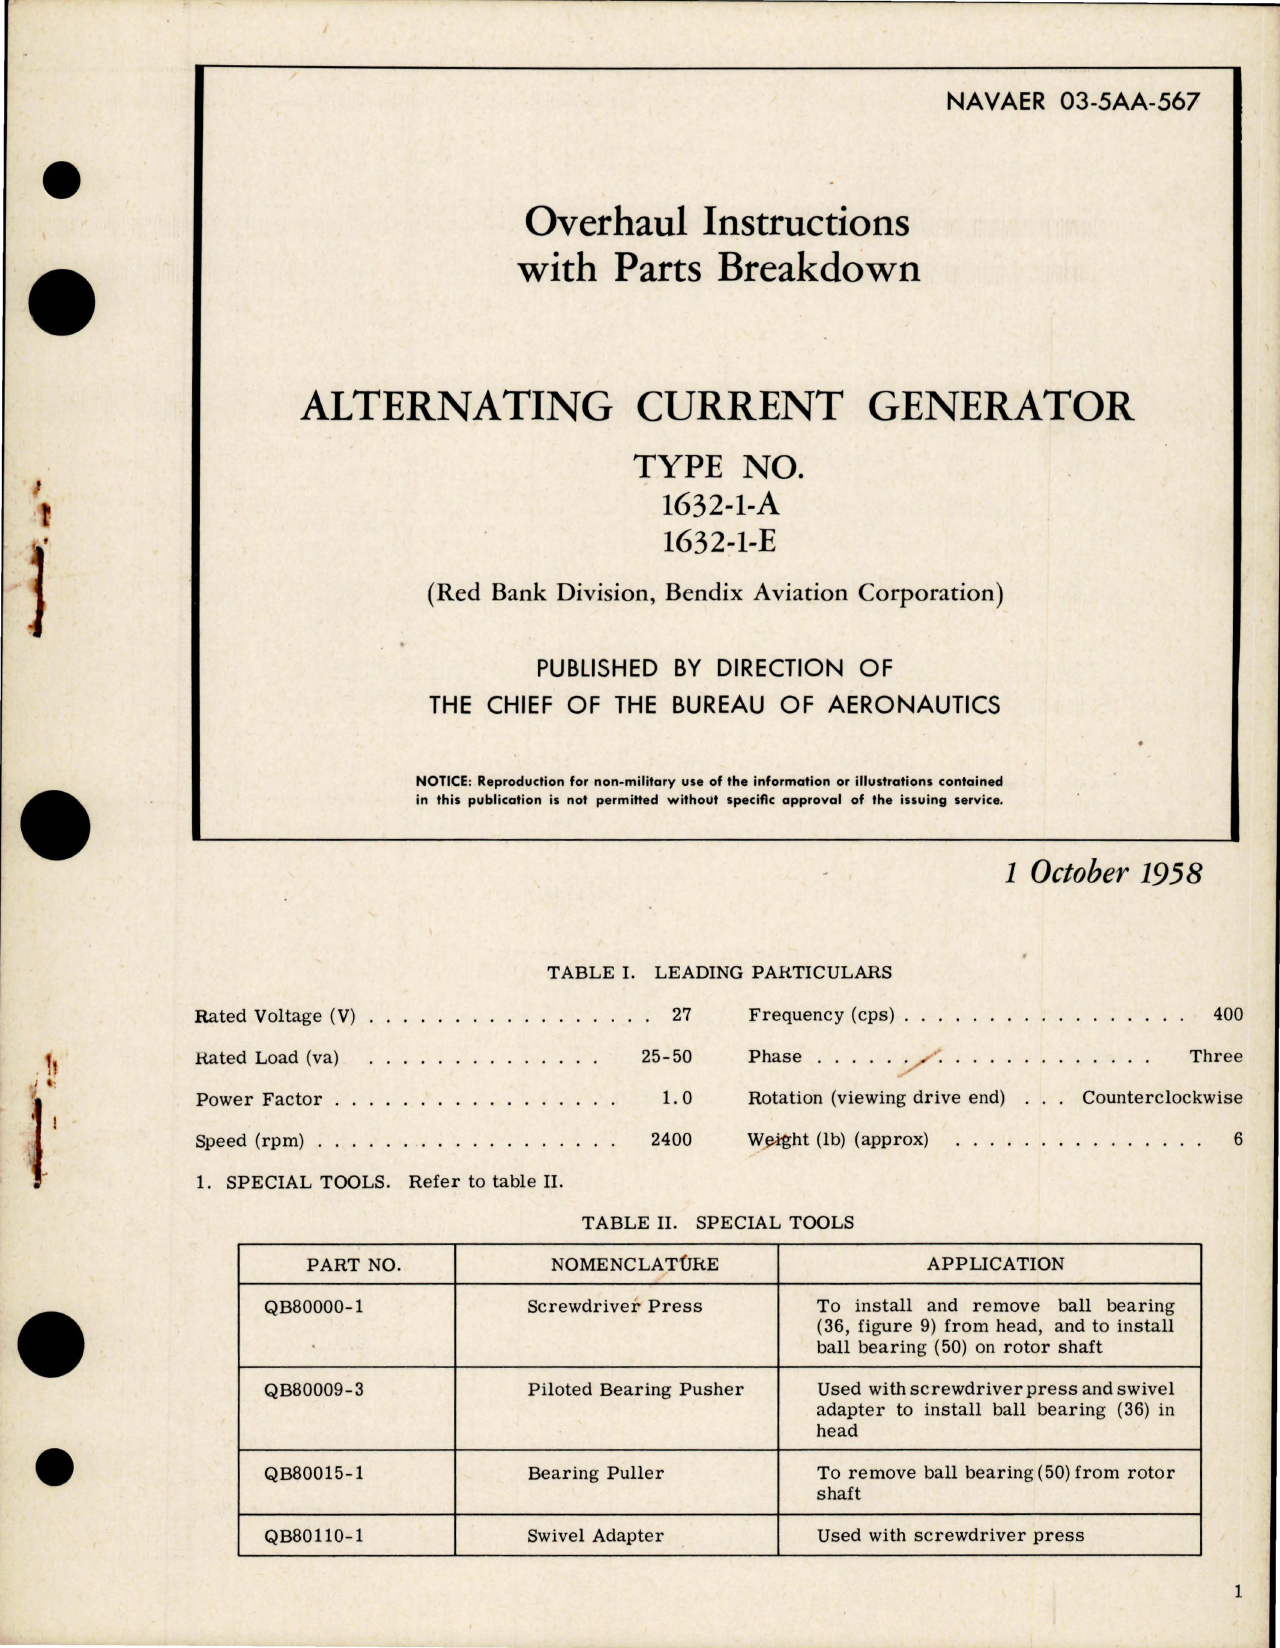 Sample page 1 from AirCorps Library document: Overhaul Instructions with Parts Breakdown for Alternating Current Generator - Types 1632-1-A and 1632-1-E